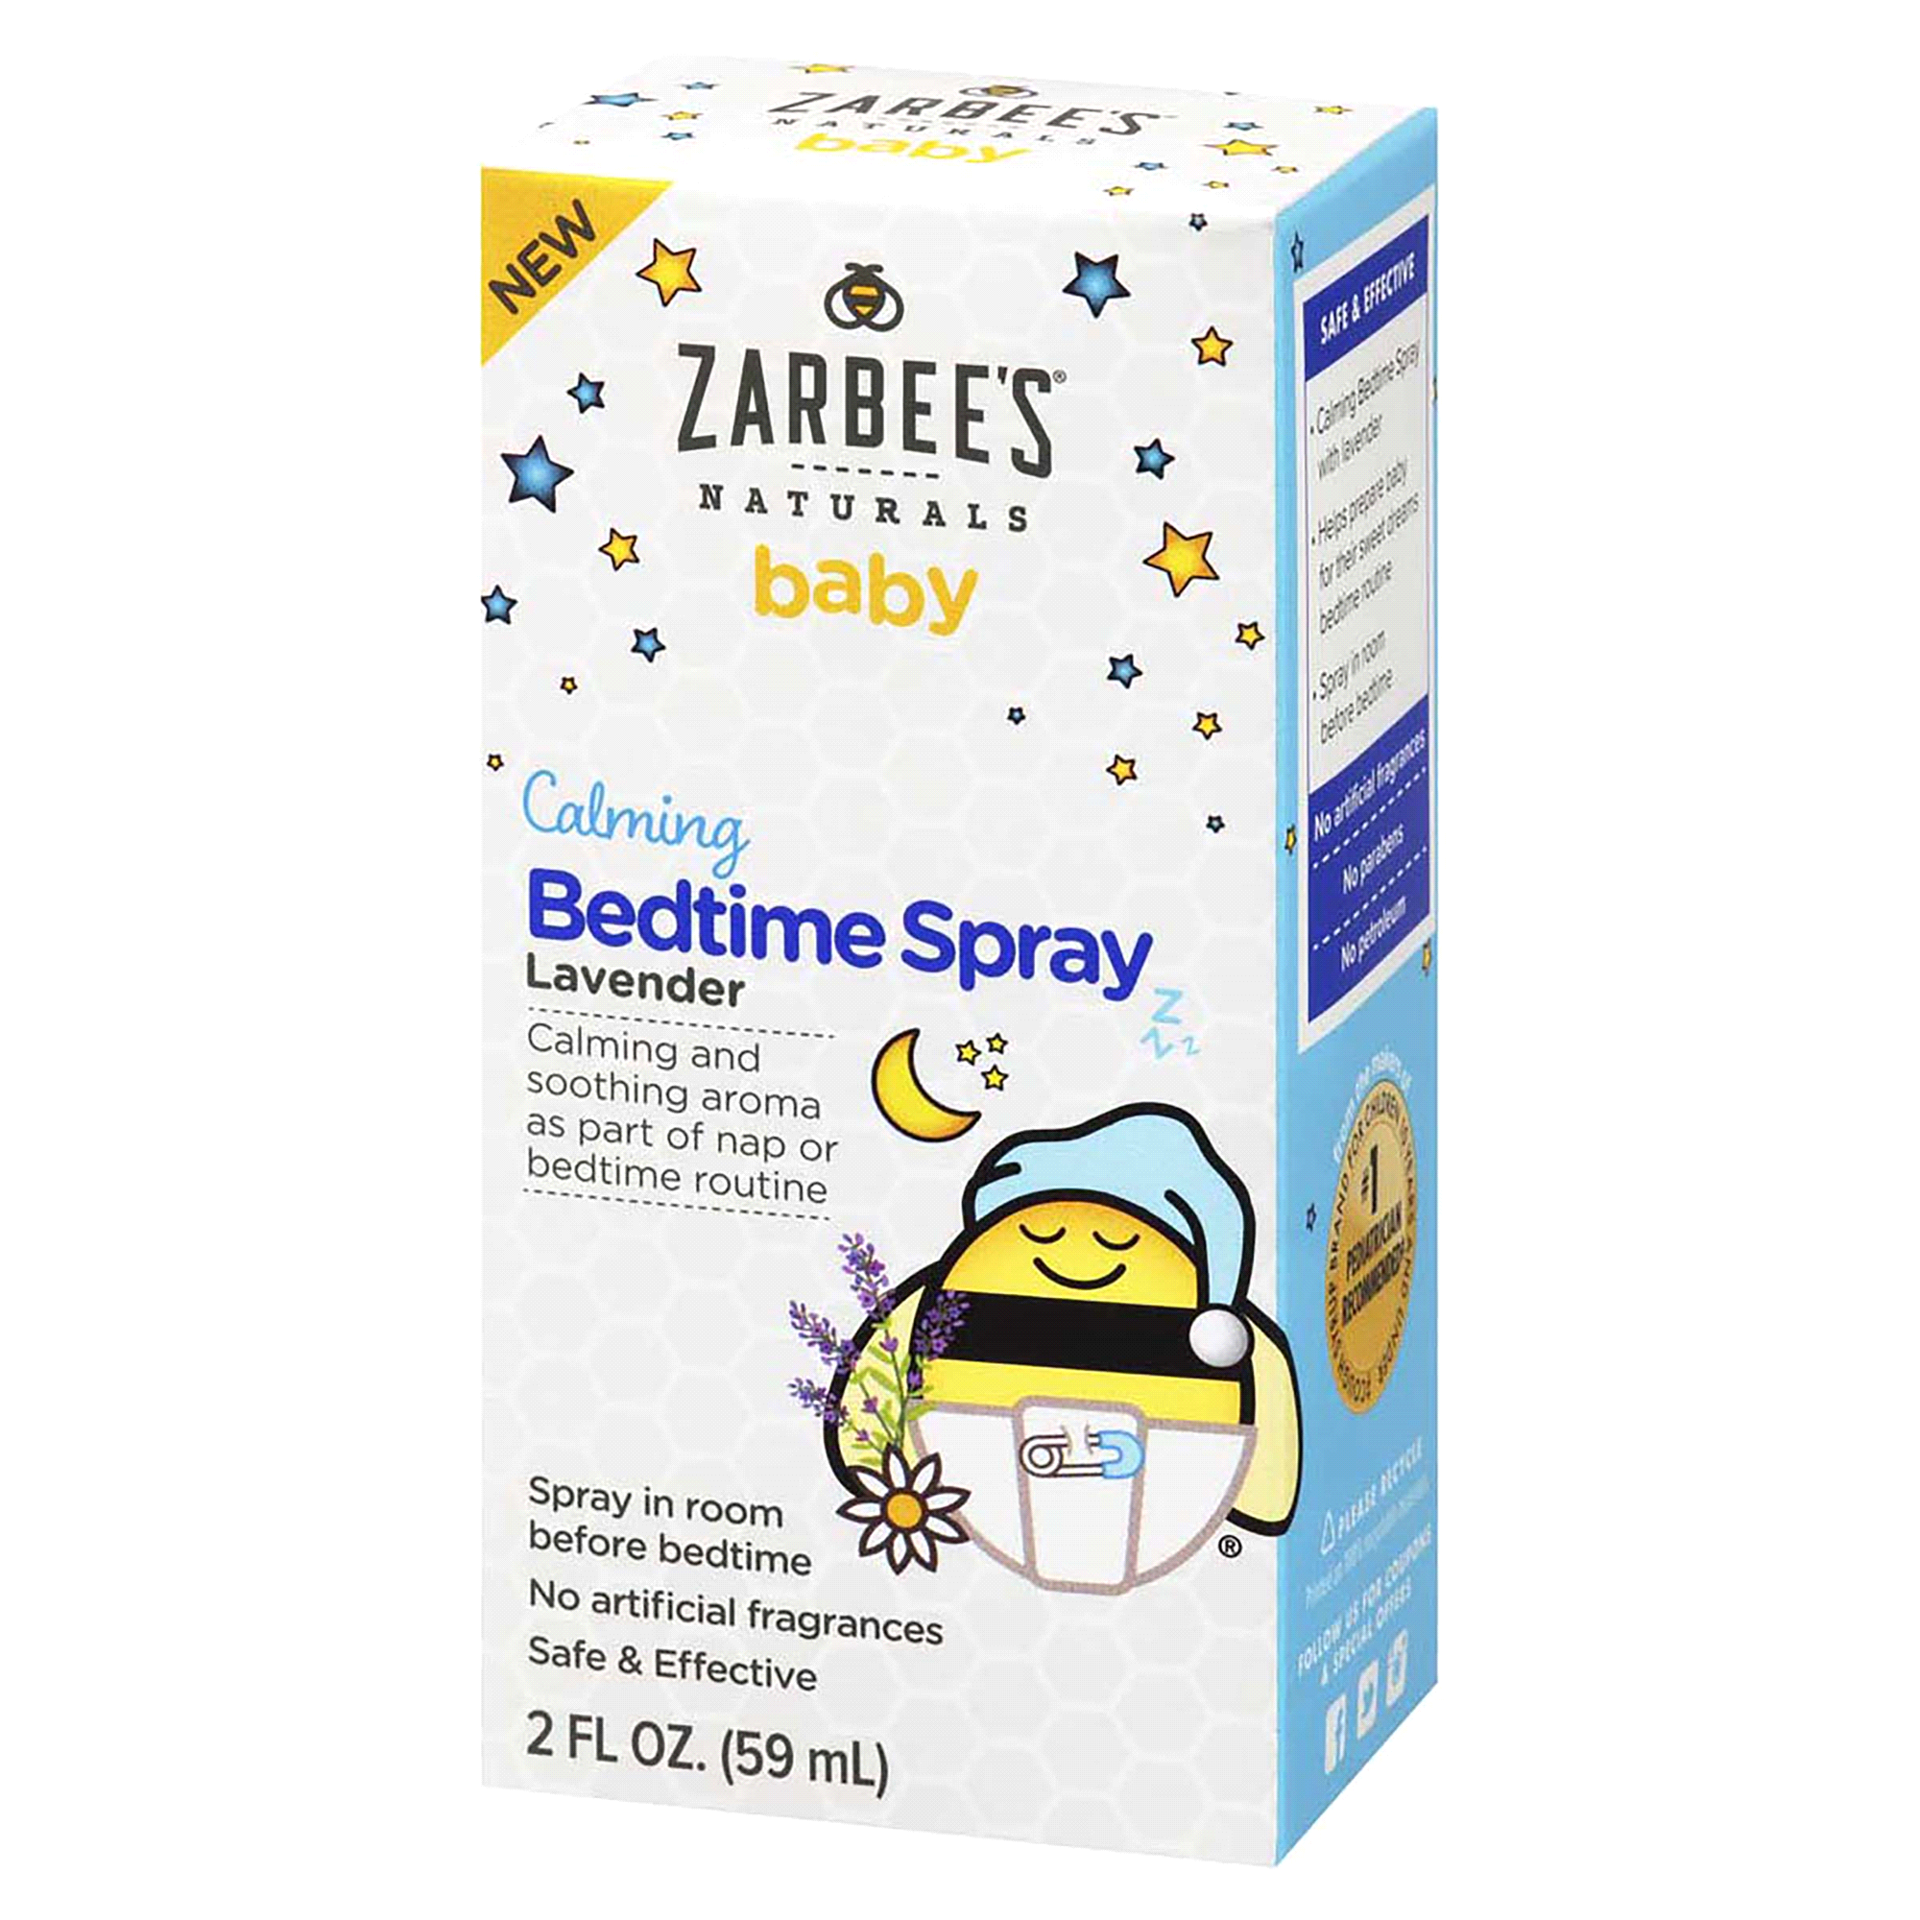 slide 12 of 13, Zarbee's Naturals Baby Sleep Spray, Calming Bedtime Spray with Natural Lavender and Chamomile to Help Infant
Nighttime Routine, 2oz Bottle, 2 fl oz